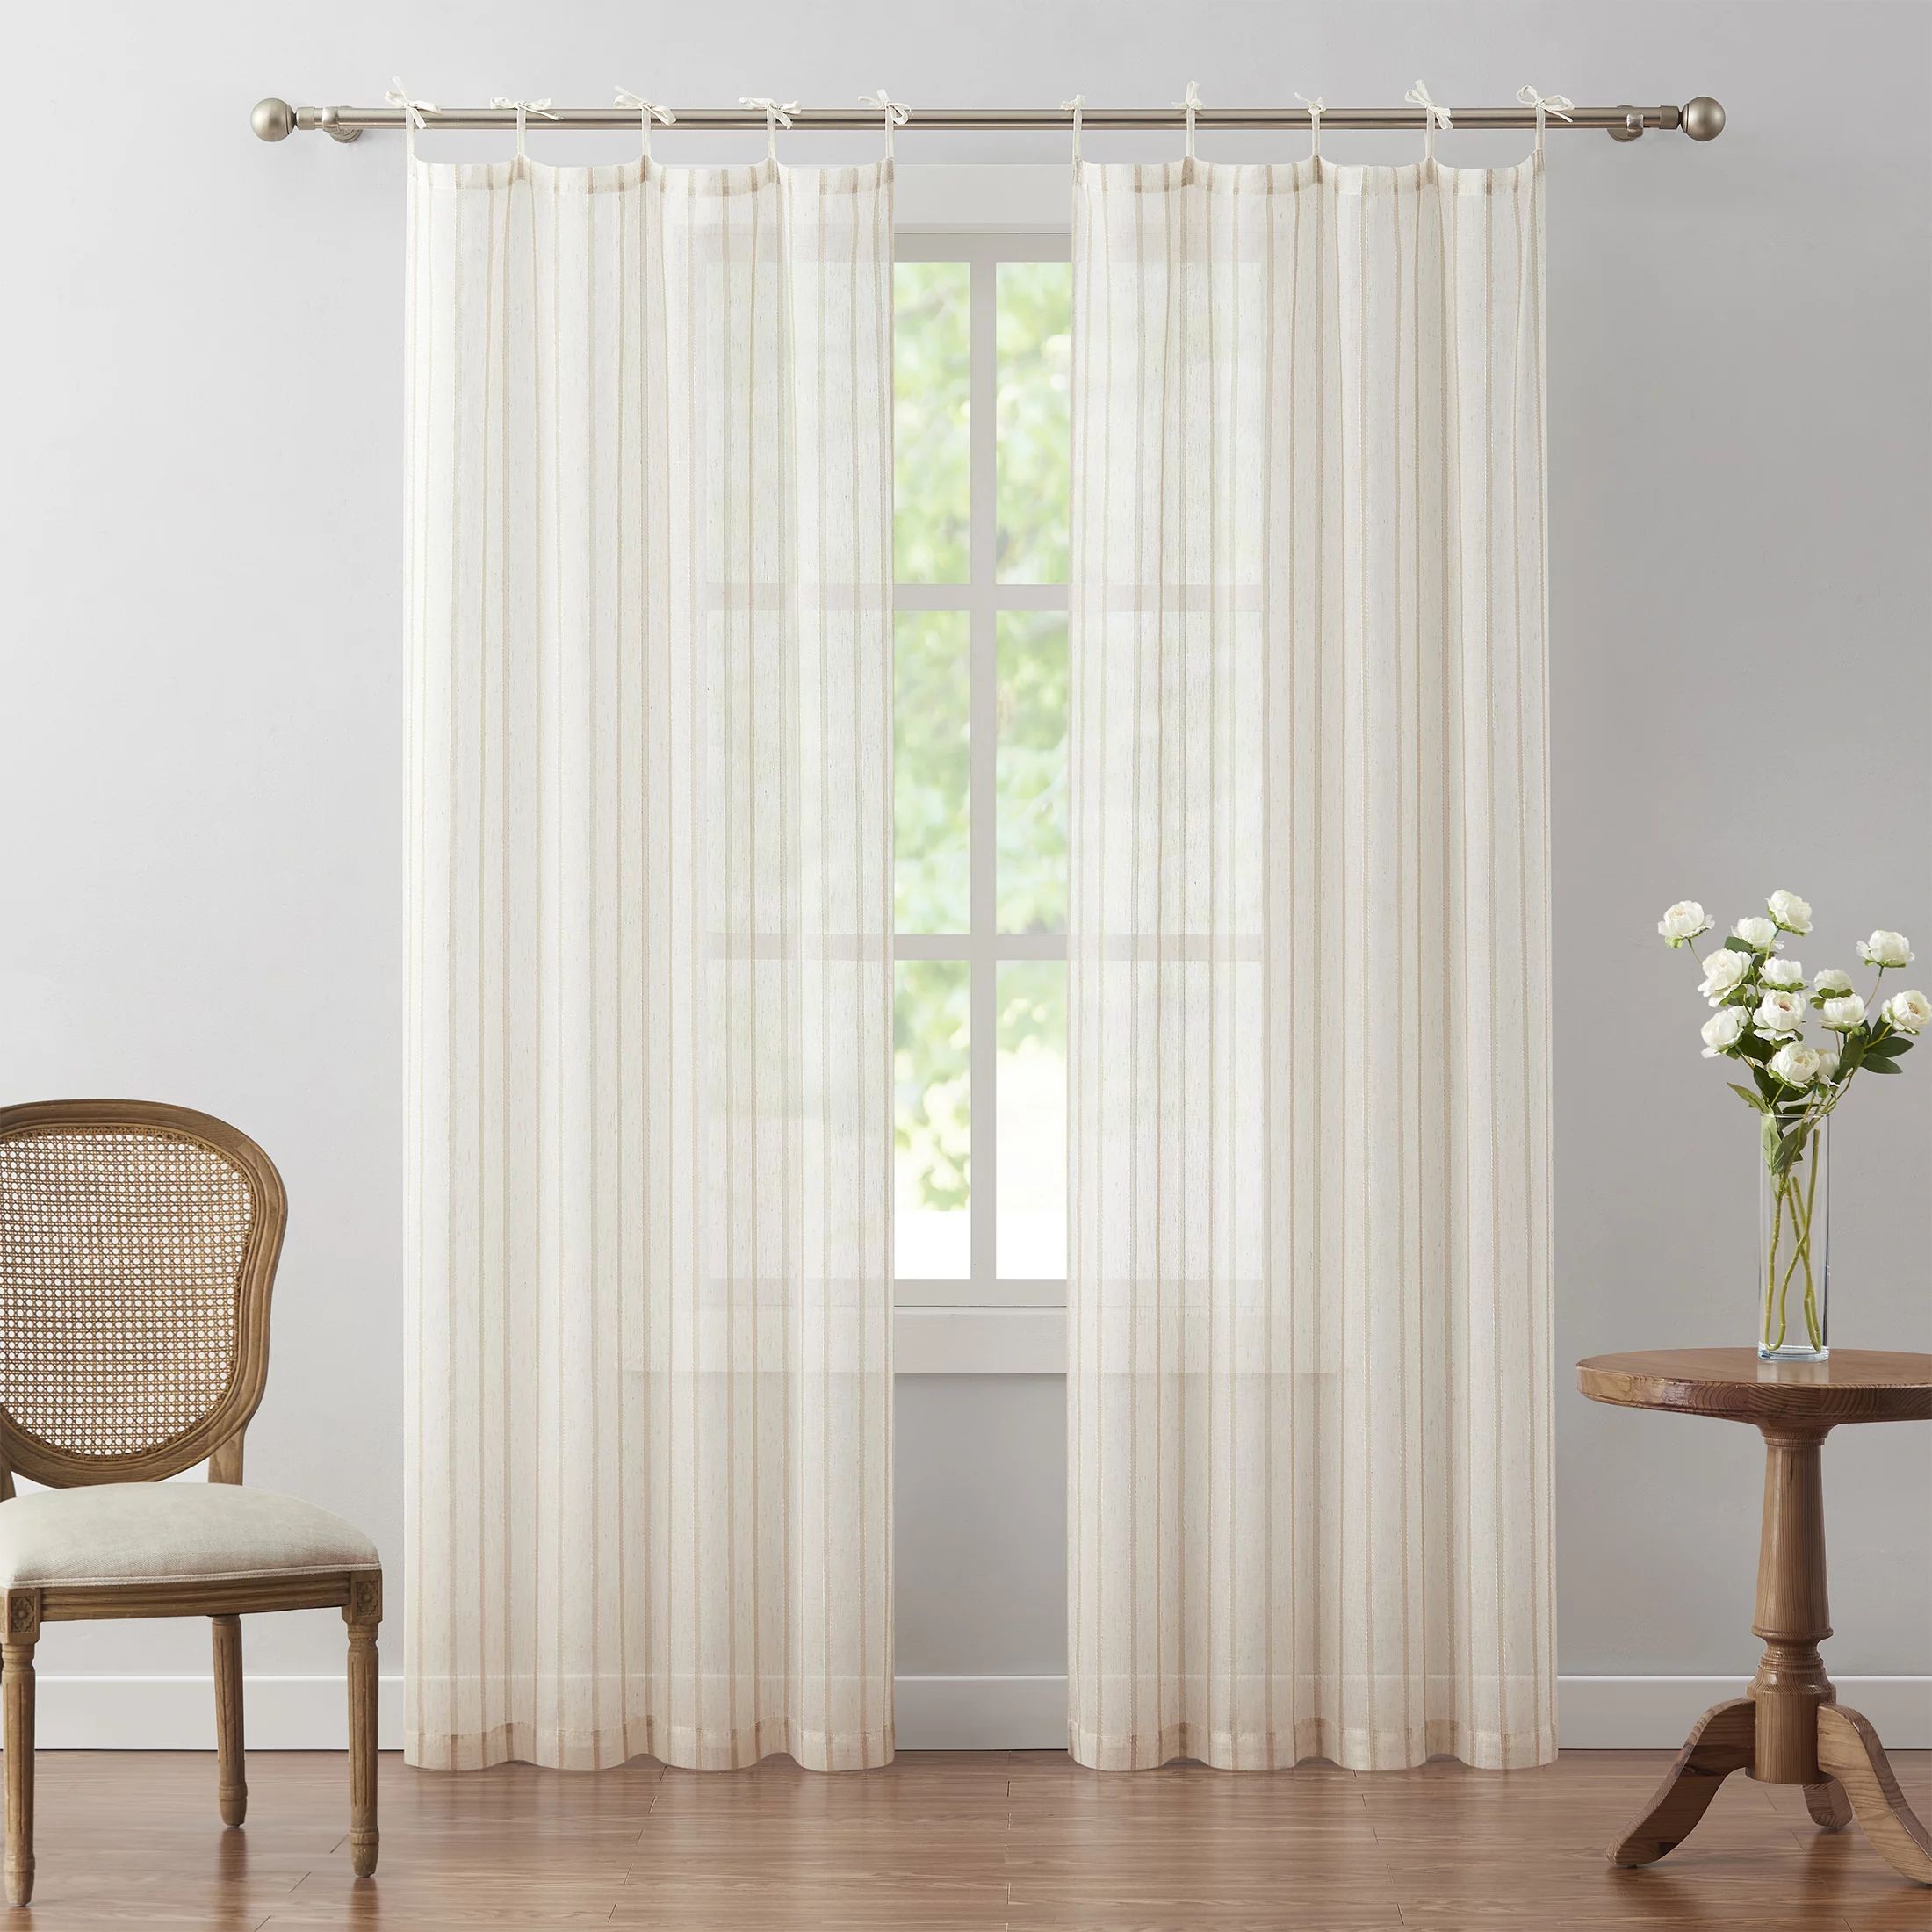 My Texas House Emerson Linen Stripe Light Filtering Tie Top Curtain Panel Pair, Taupe, 76" x 106"... | Walmart (US)